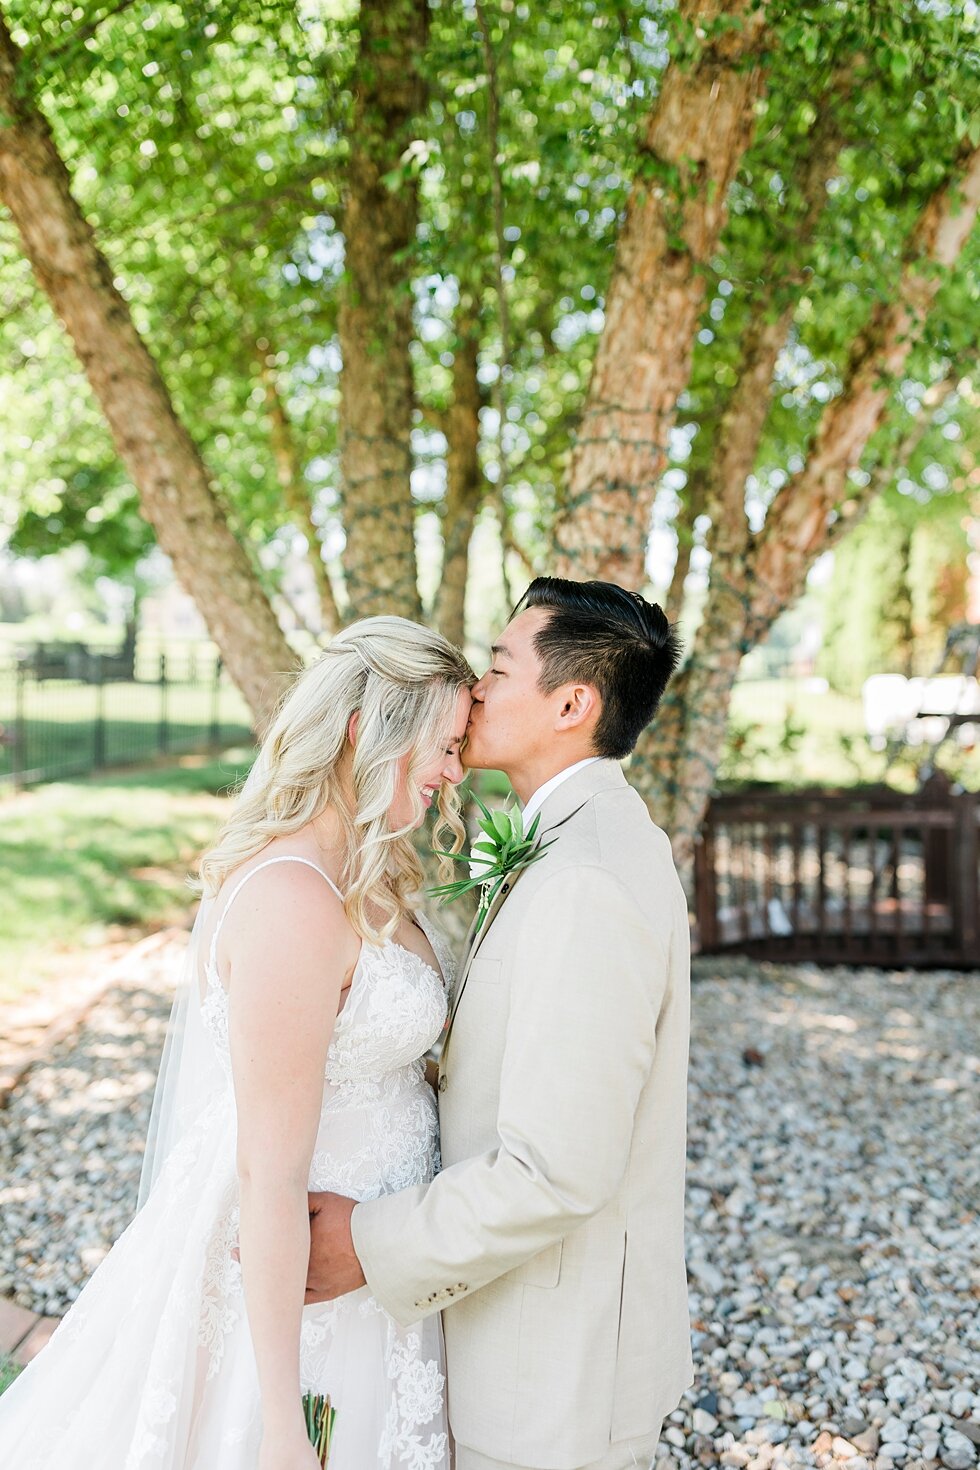  Sweet kiss on the forehead for this couple. Romantic casual lace wedding gown close friends neutral colors background wedding natural greenery crisp white #midwestphotographer #kywedding #louisville #kentuckywedding #louisvillekyweddingphotographer 